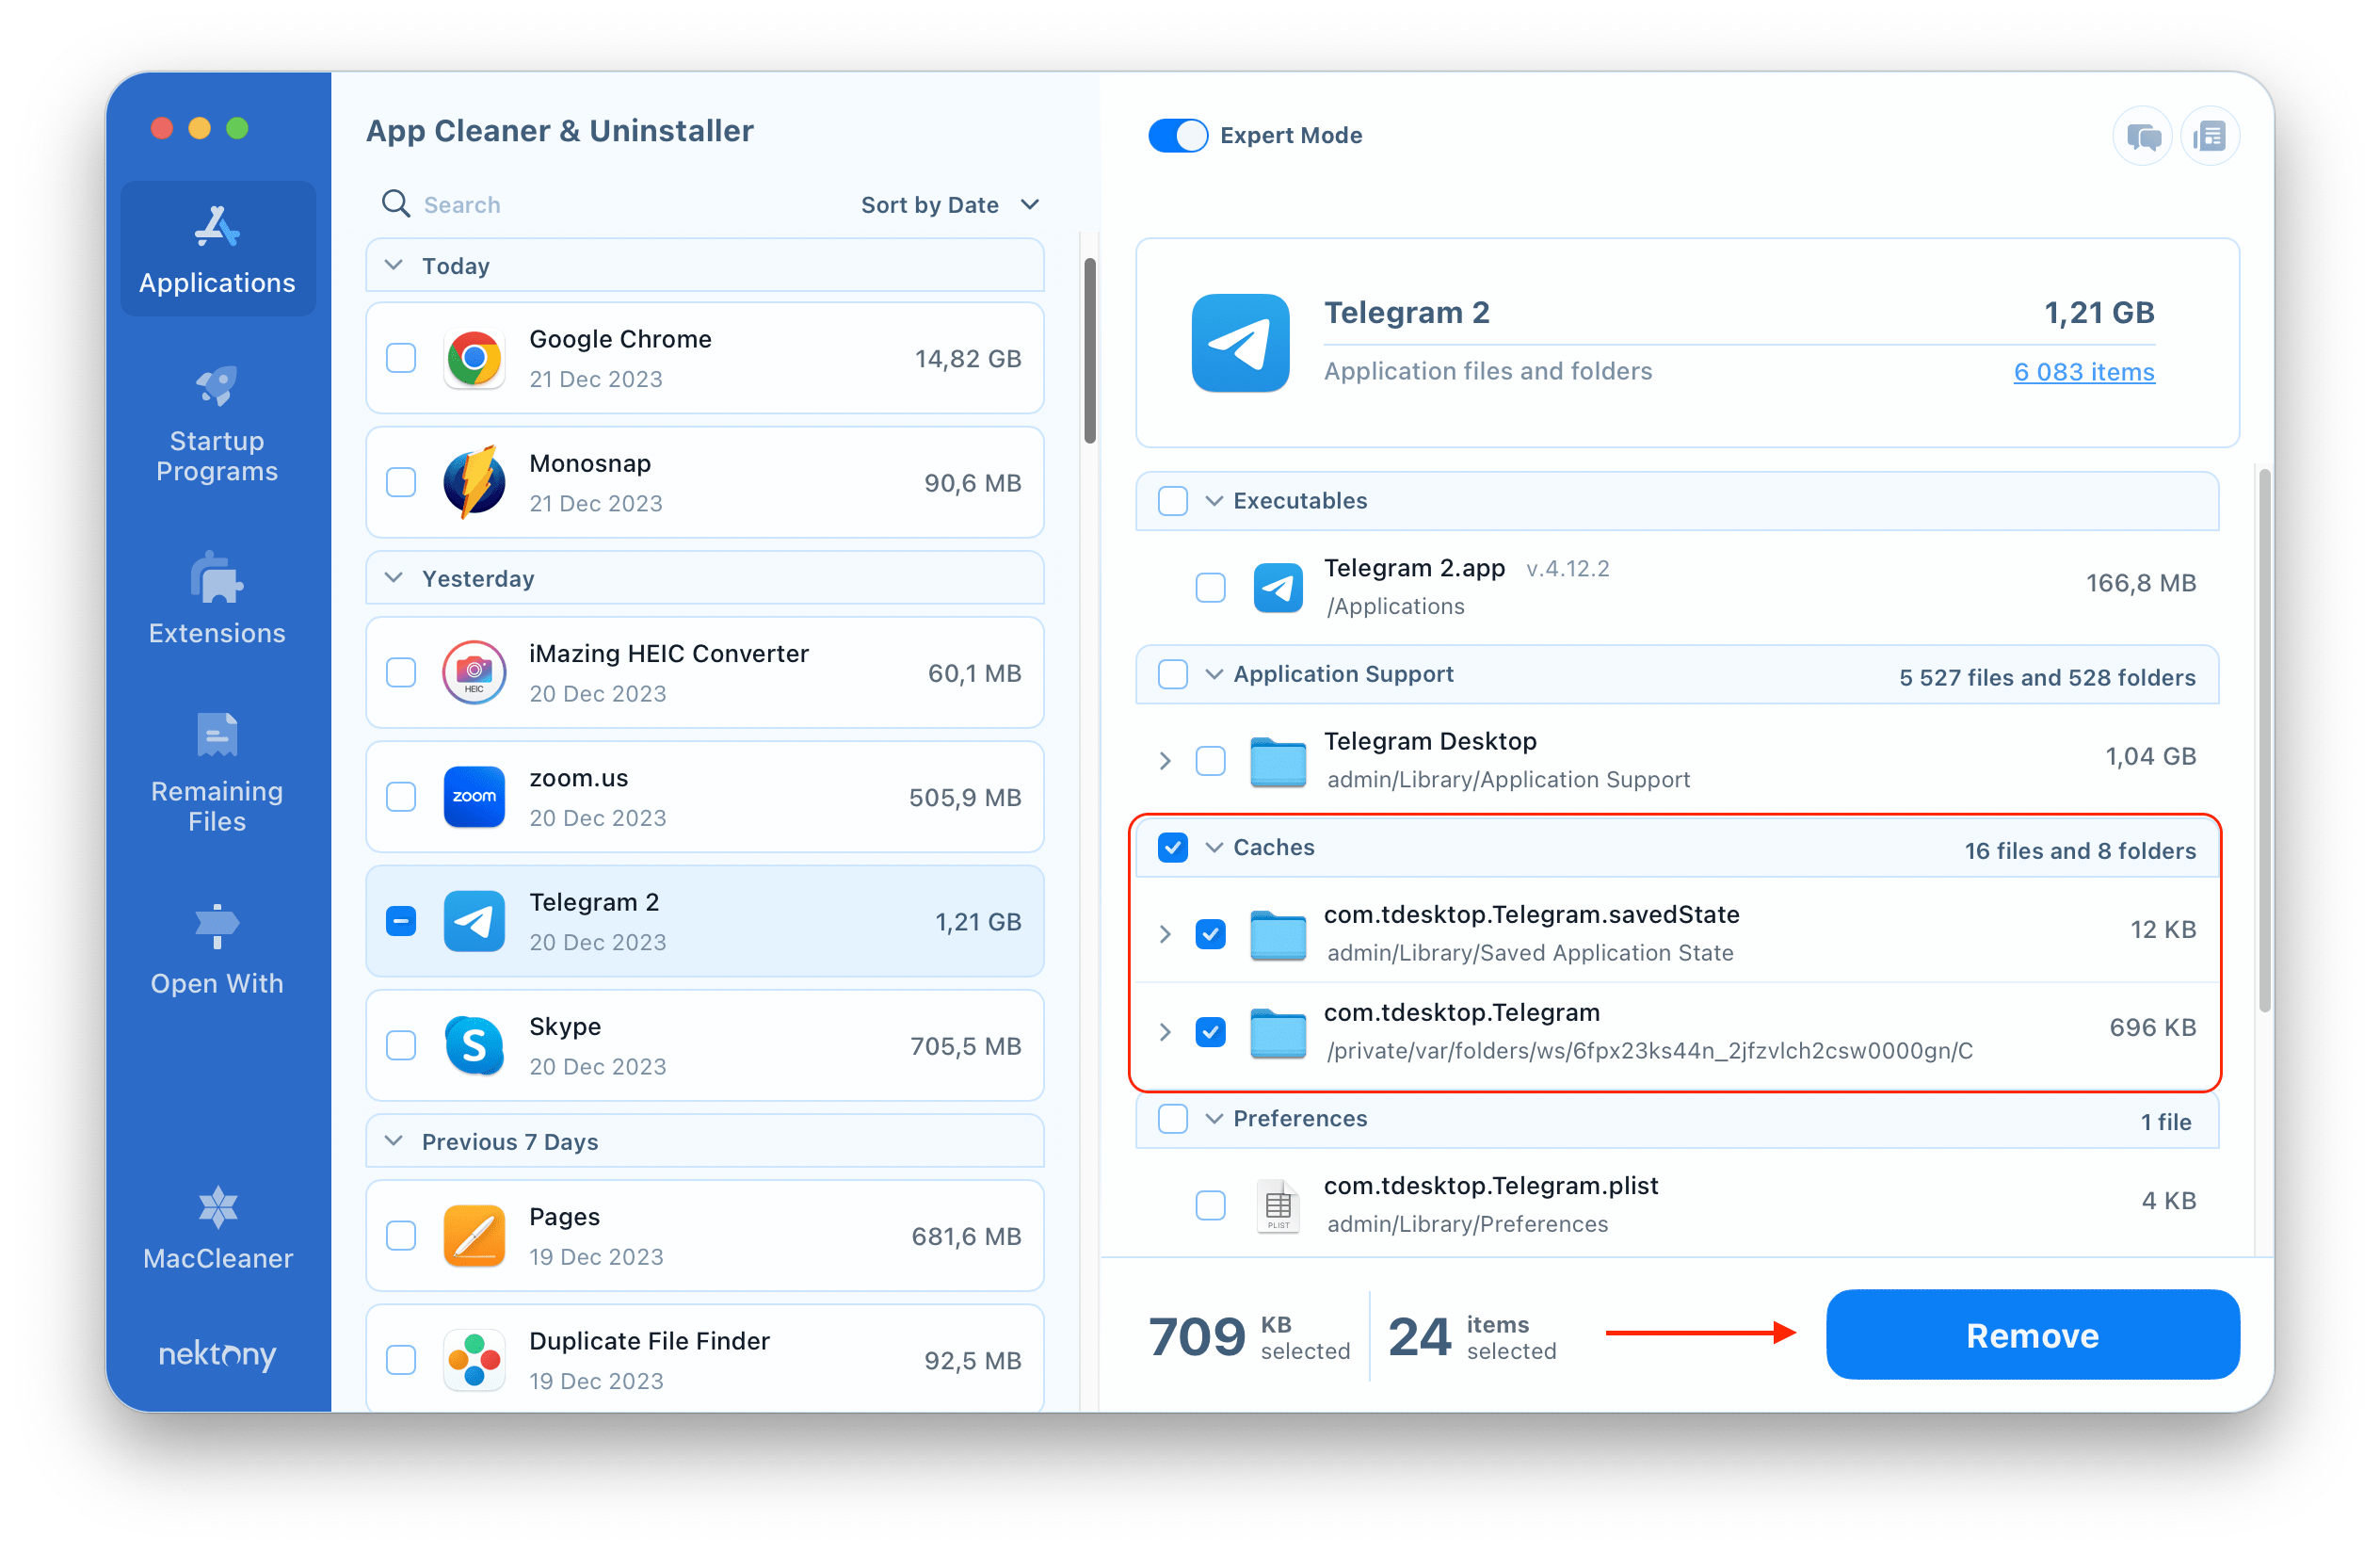 App Cleaner & Uninstaller showing cache files